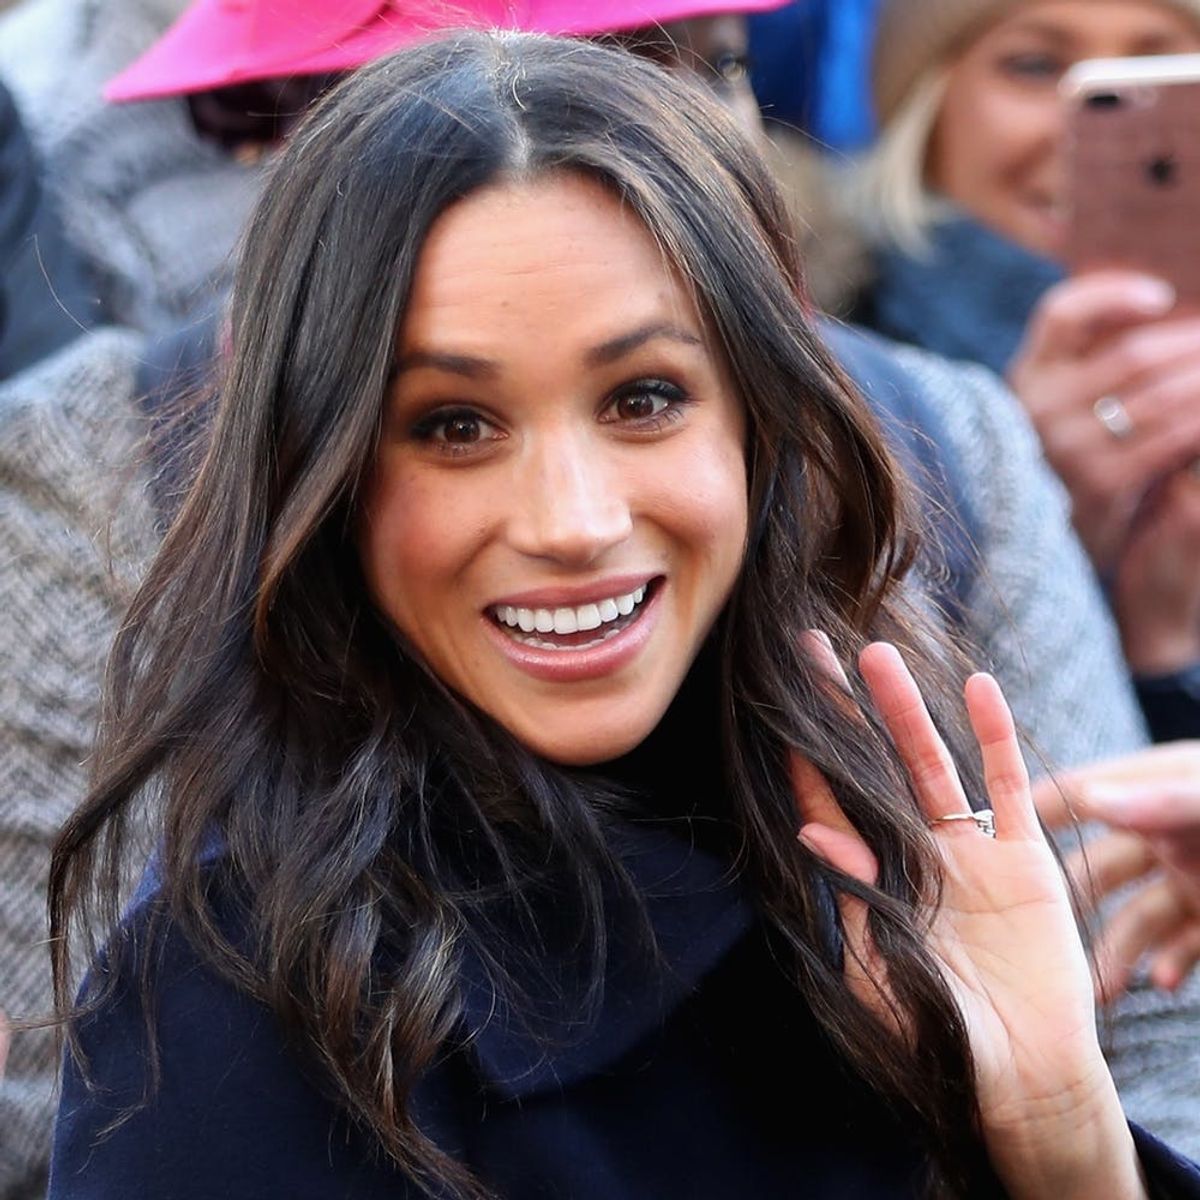 Meghan Markle Made a Surprise Appearance at the Queen’s Staff Christmas Party